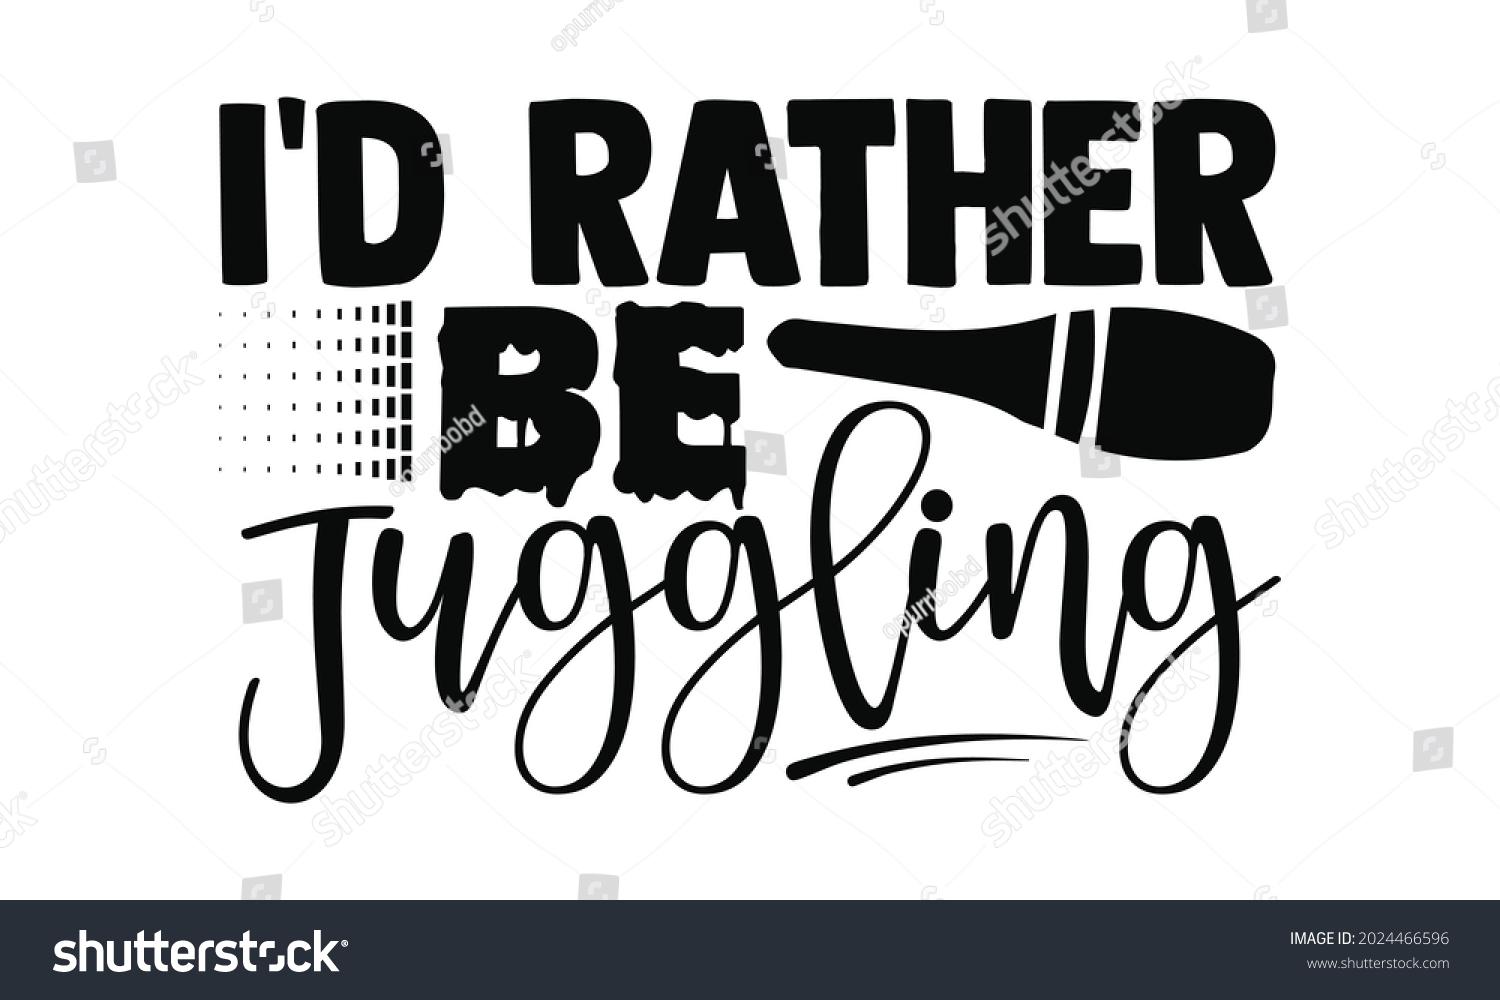 SVG of I'd rather be juggling- Juggling t shirts design, Hand drawn lettering phrase, Calligraphy t shirt design, Isolated on white background, svg Files for Cutting Cricut, Silhouette, EPS 10  svg